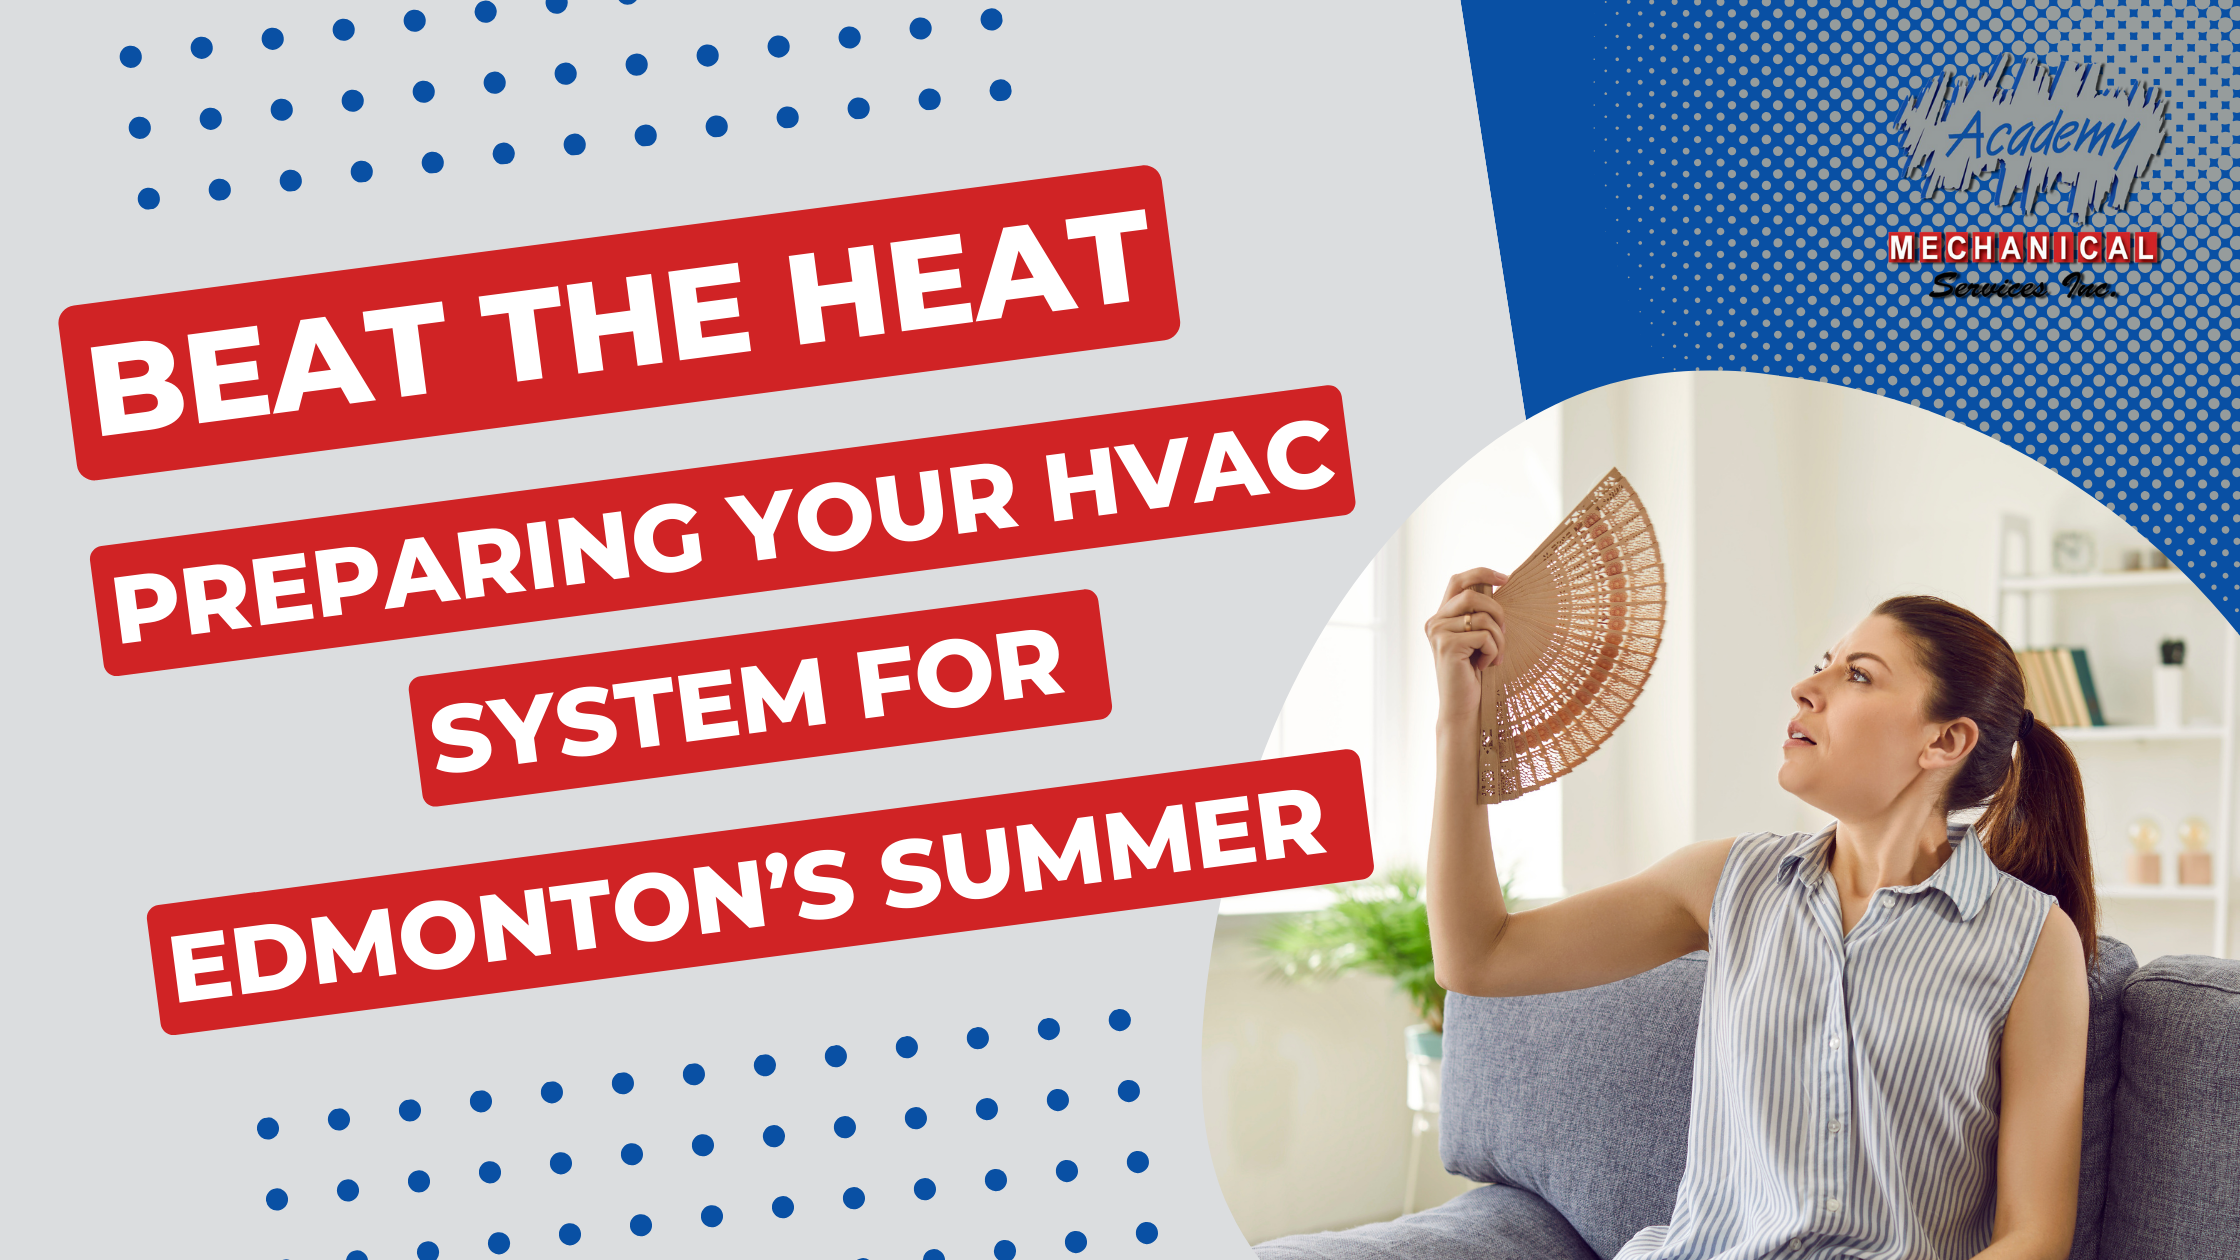 You are currently viewing Beat the Heat: Preparing your HVAC System for Edmonton’s Summer